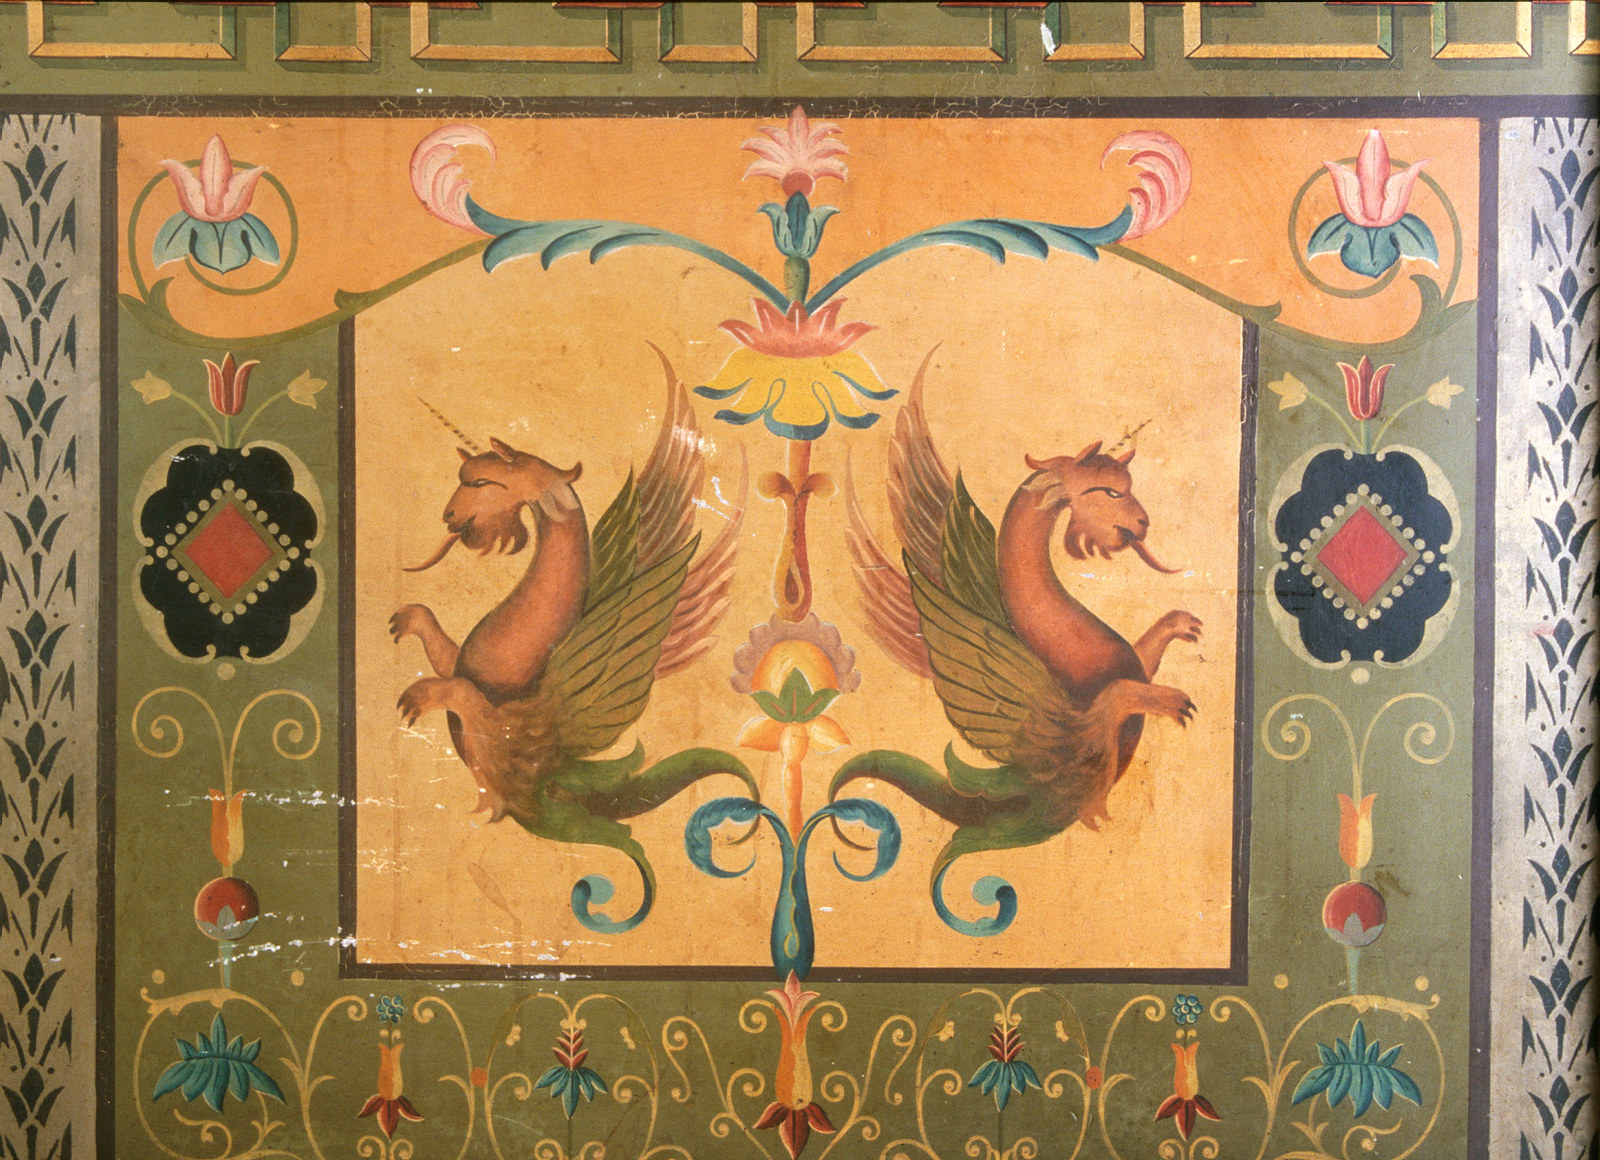 Detail from the dado in the entrance hall of house Valetta, 89 Crystal Street Petersham, showing painted decoration of a pair of mythical creatures (similar to griffins/gryphons).